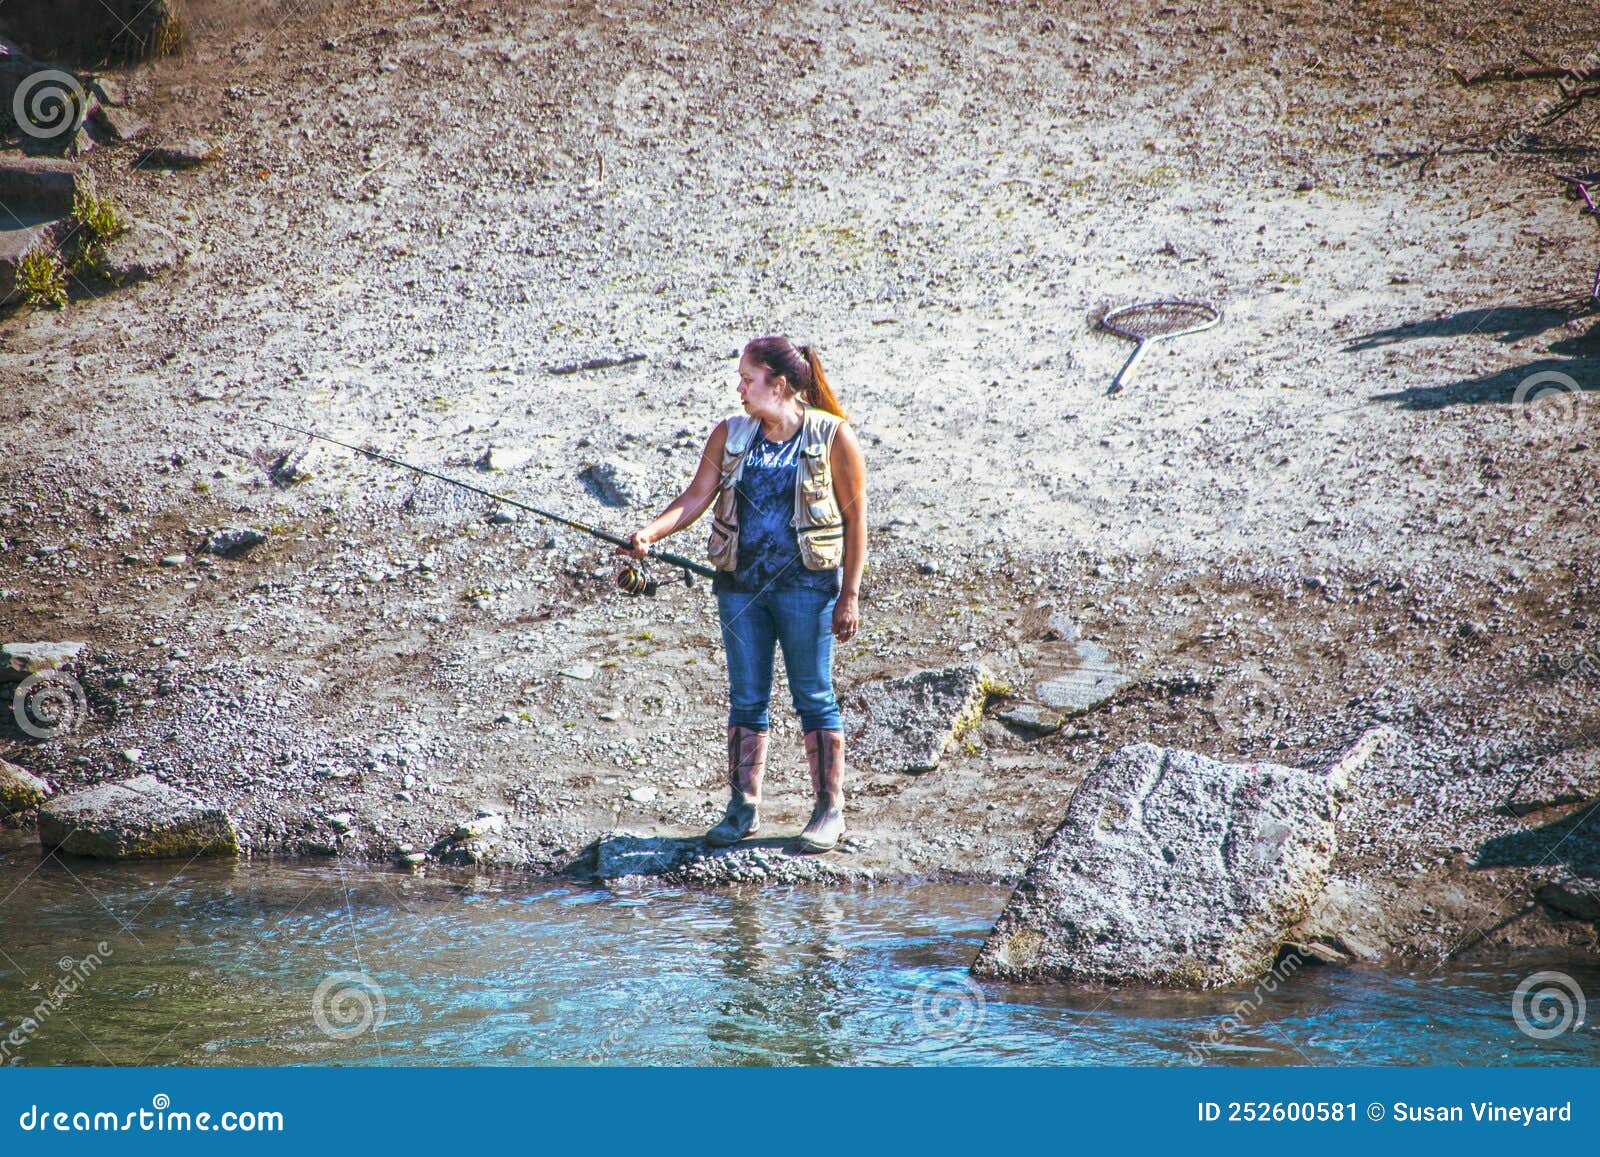 https://thumbs.dreamstime.com/z/anchorage-alaska-usa-woman-rubber-boots-fishing-vest-fishes-salmon-ship-creek-near-downtow-anchorage-alaska-usa-252600581.jpg